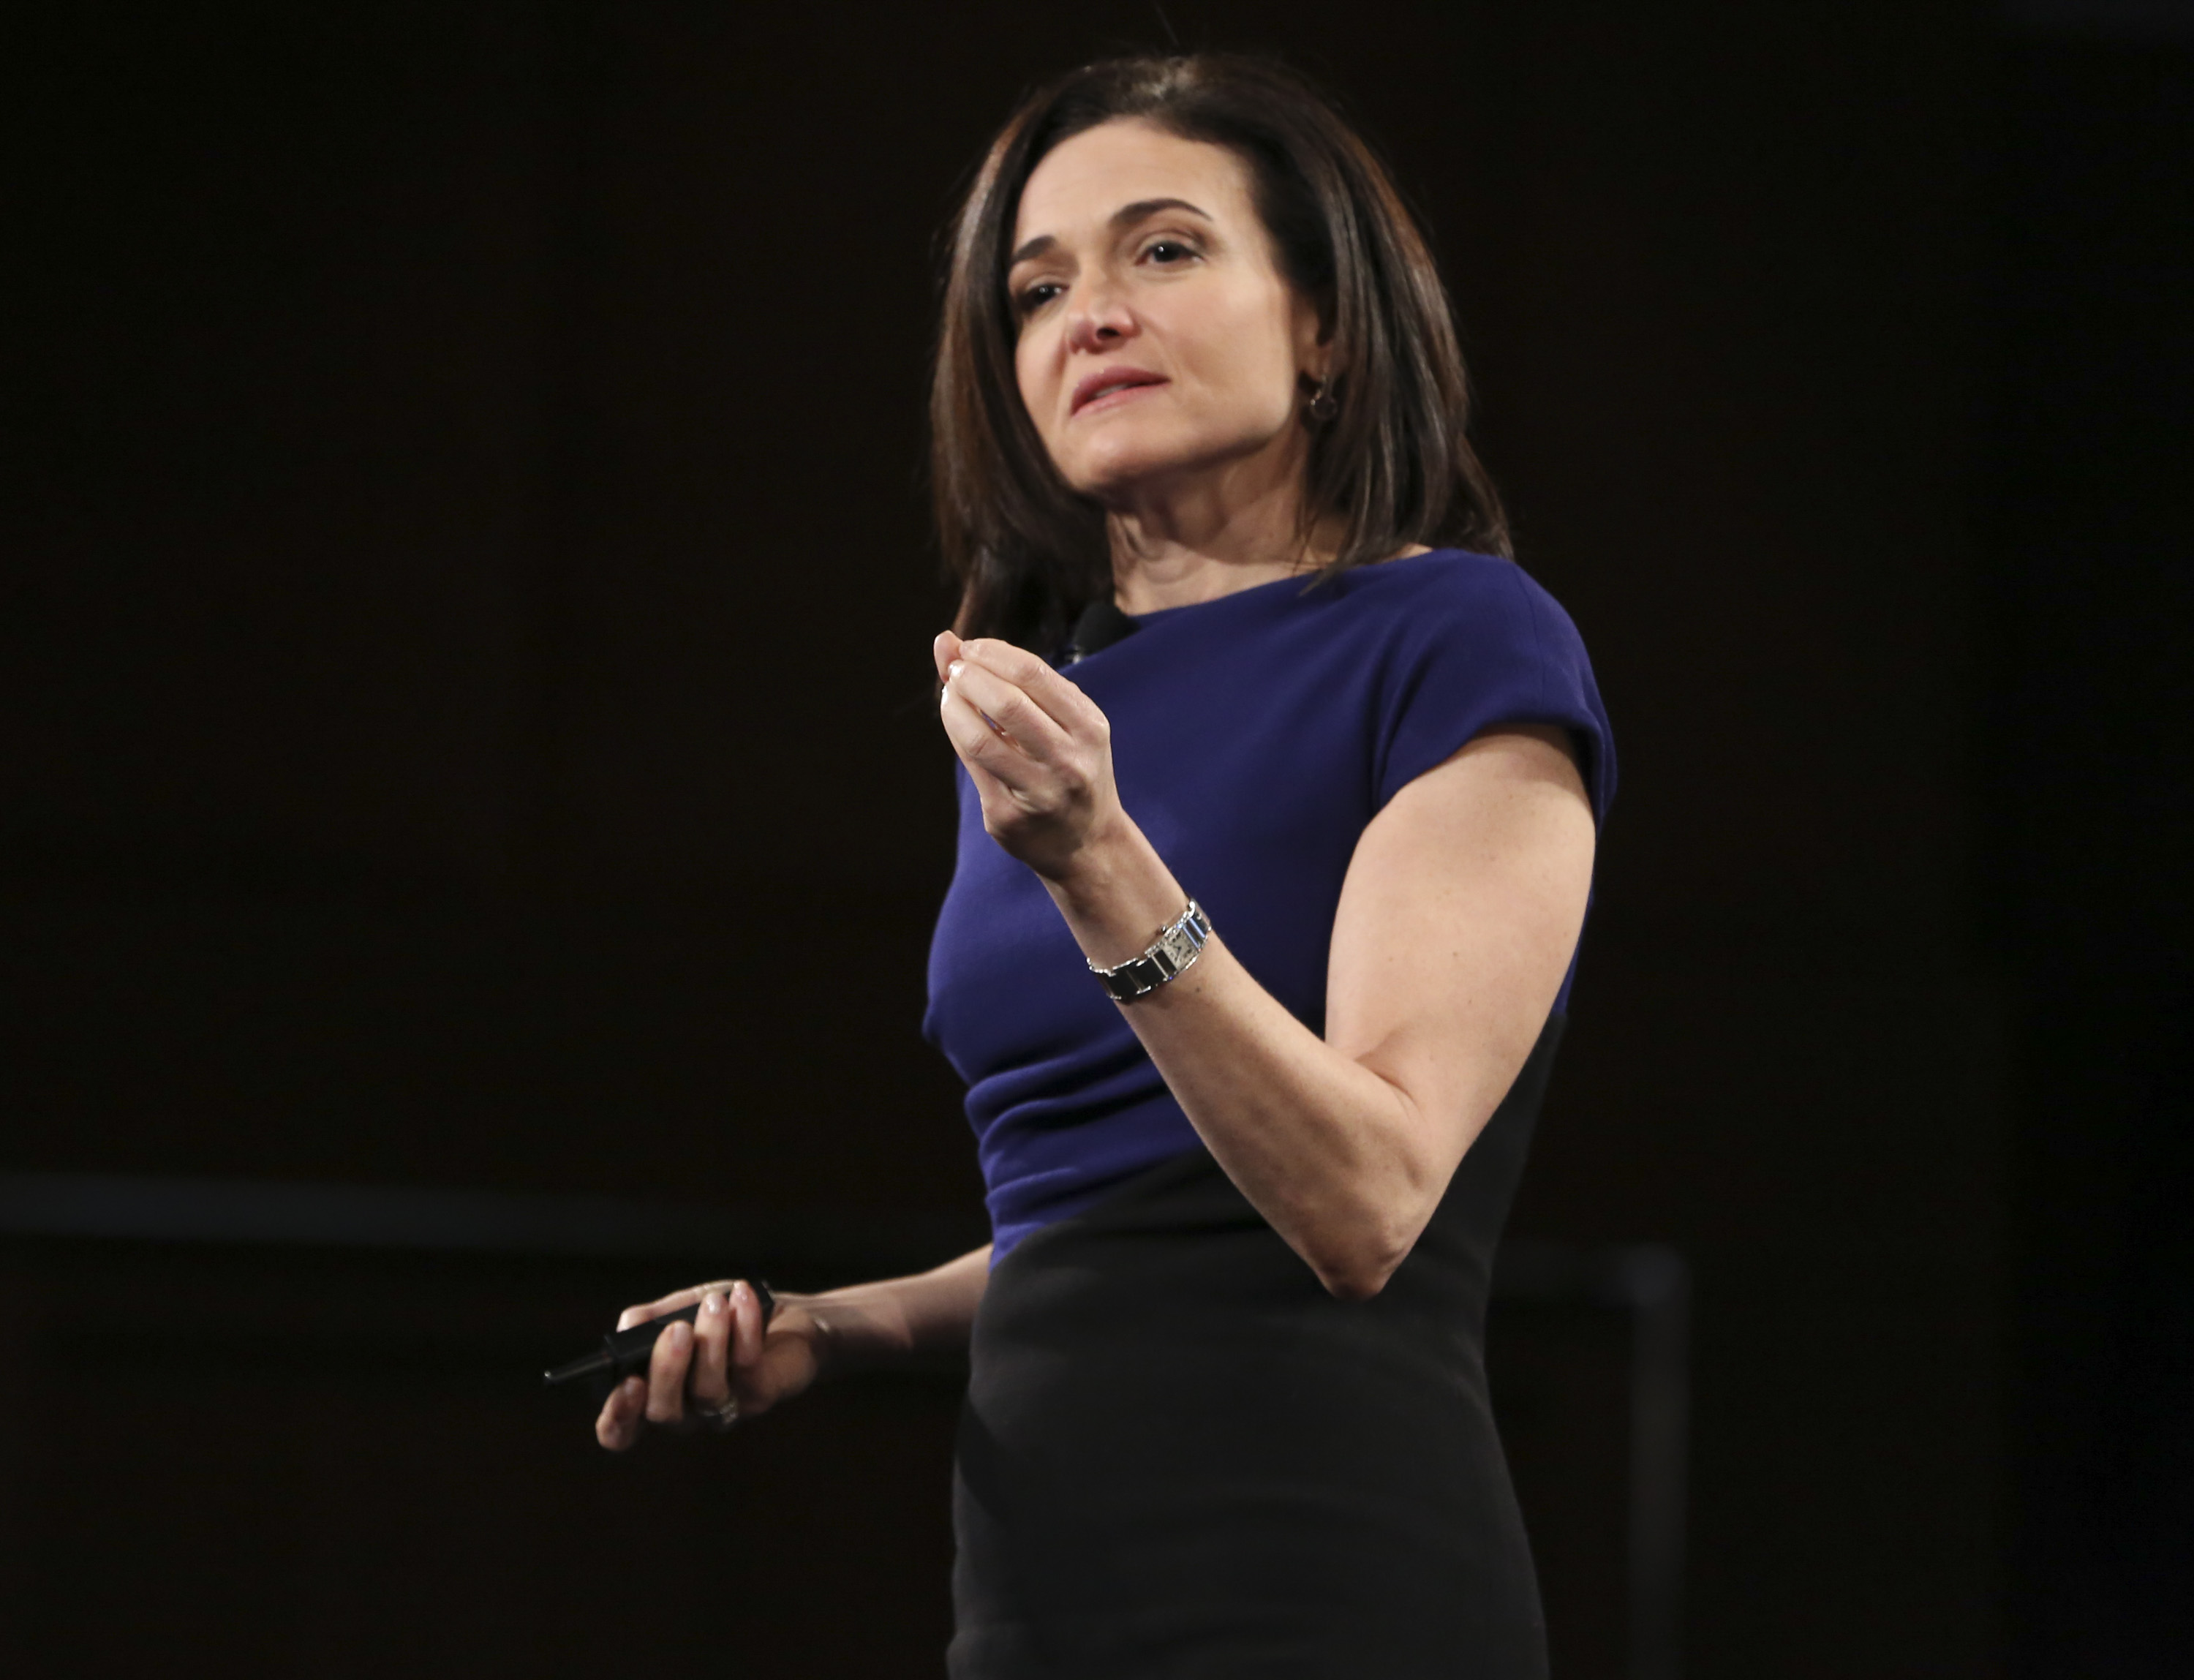 Facebook COO Sheryl Sandberg speaks on stage at the 2016 MAKERS Conference Day 2 at the Terrenea Resort in Rancho Palos Verdes, Calif. on Feb. 2, 2016. (Jonathan Leibson—AOL/Getty Images)